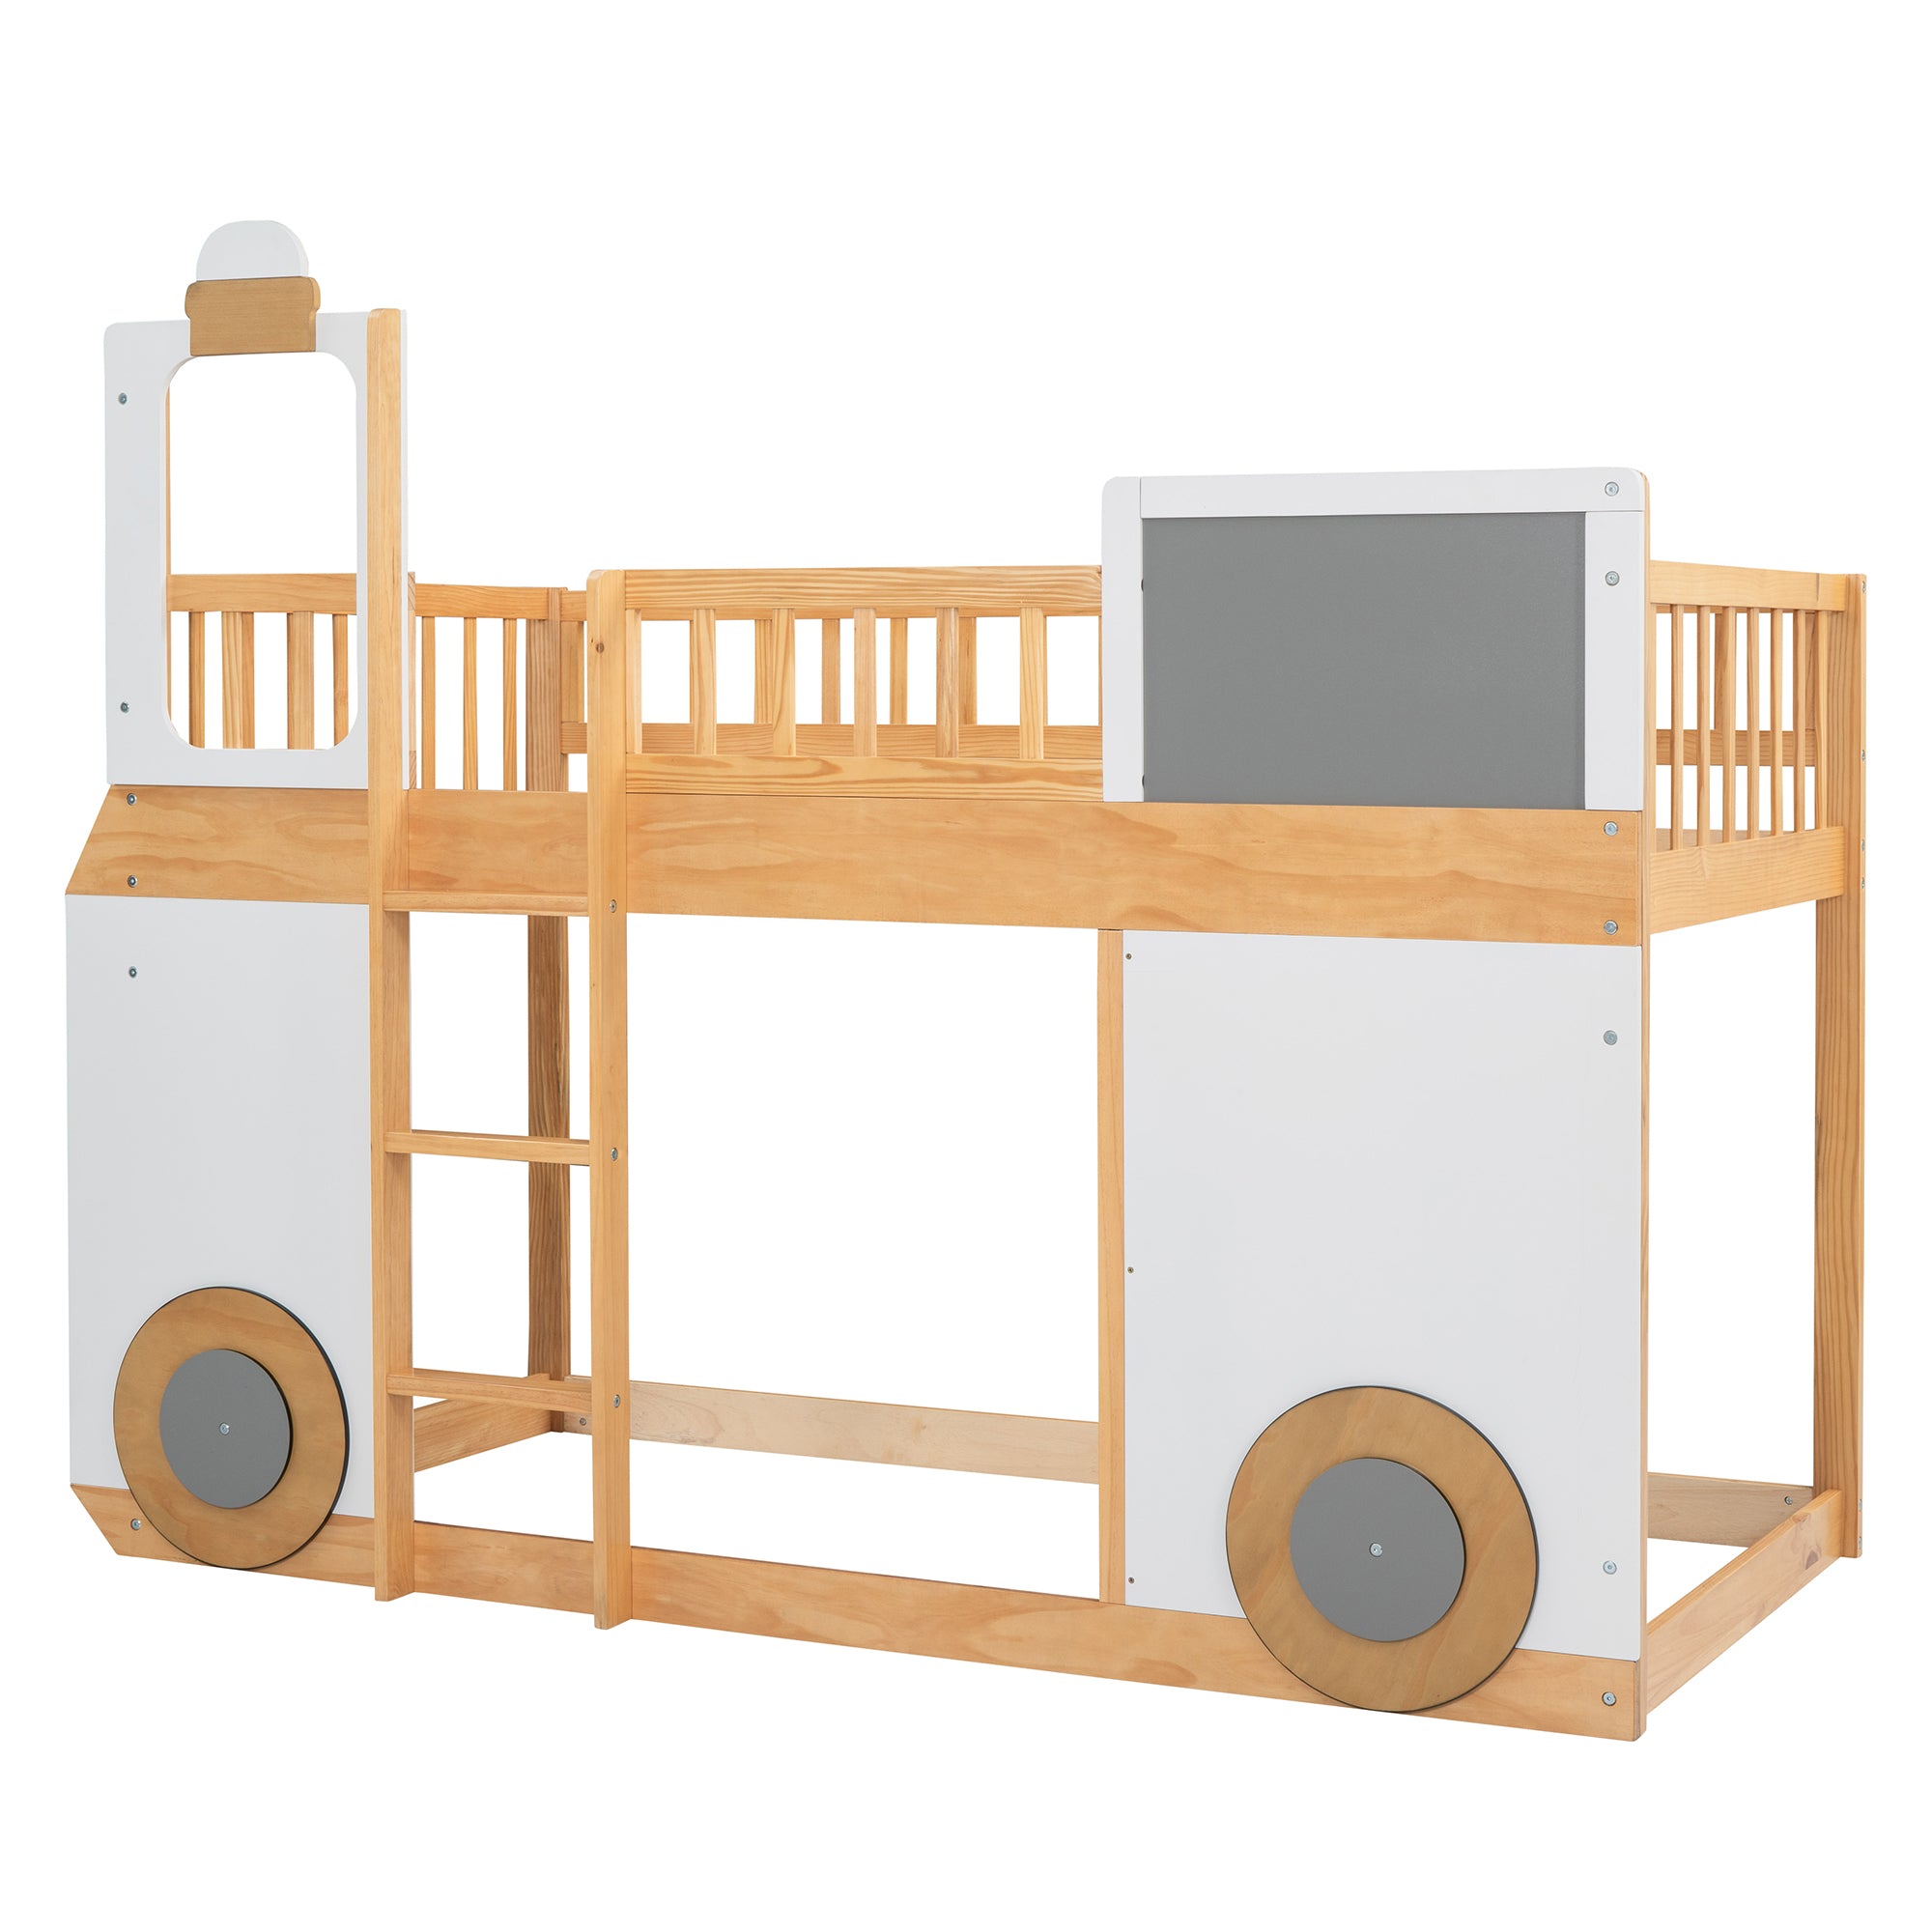 Train Shape Design Twin size Loft Bed Wooden Bed (Nature Wood)